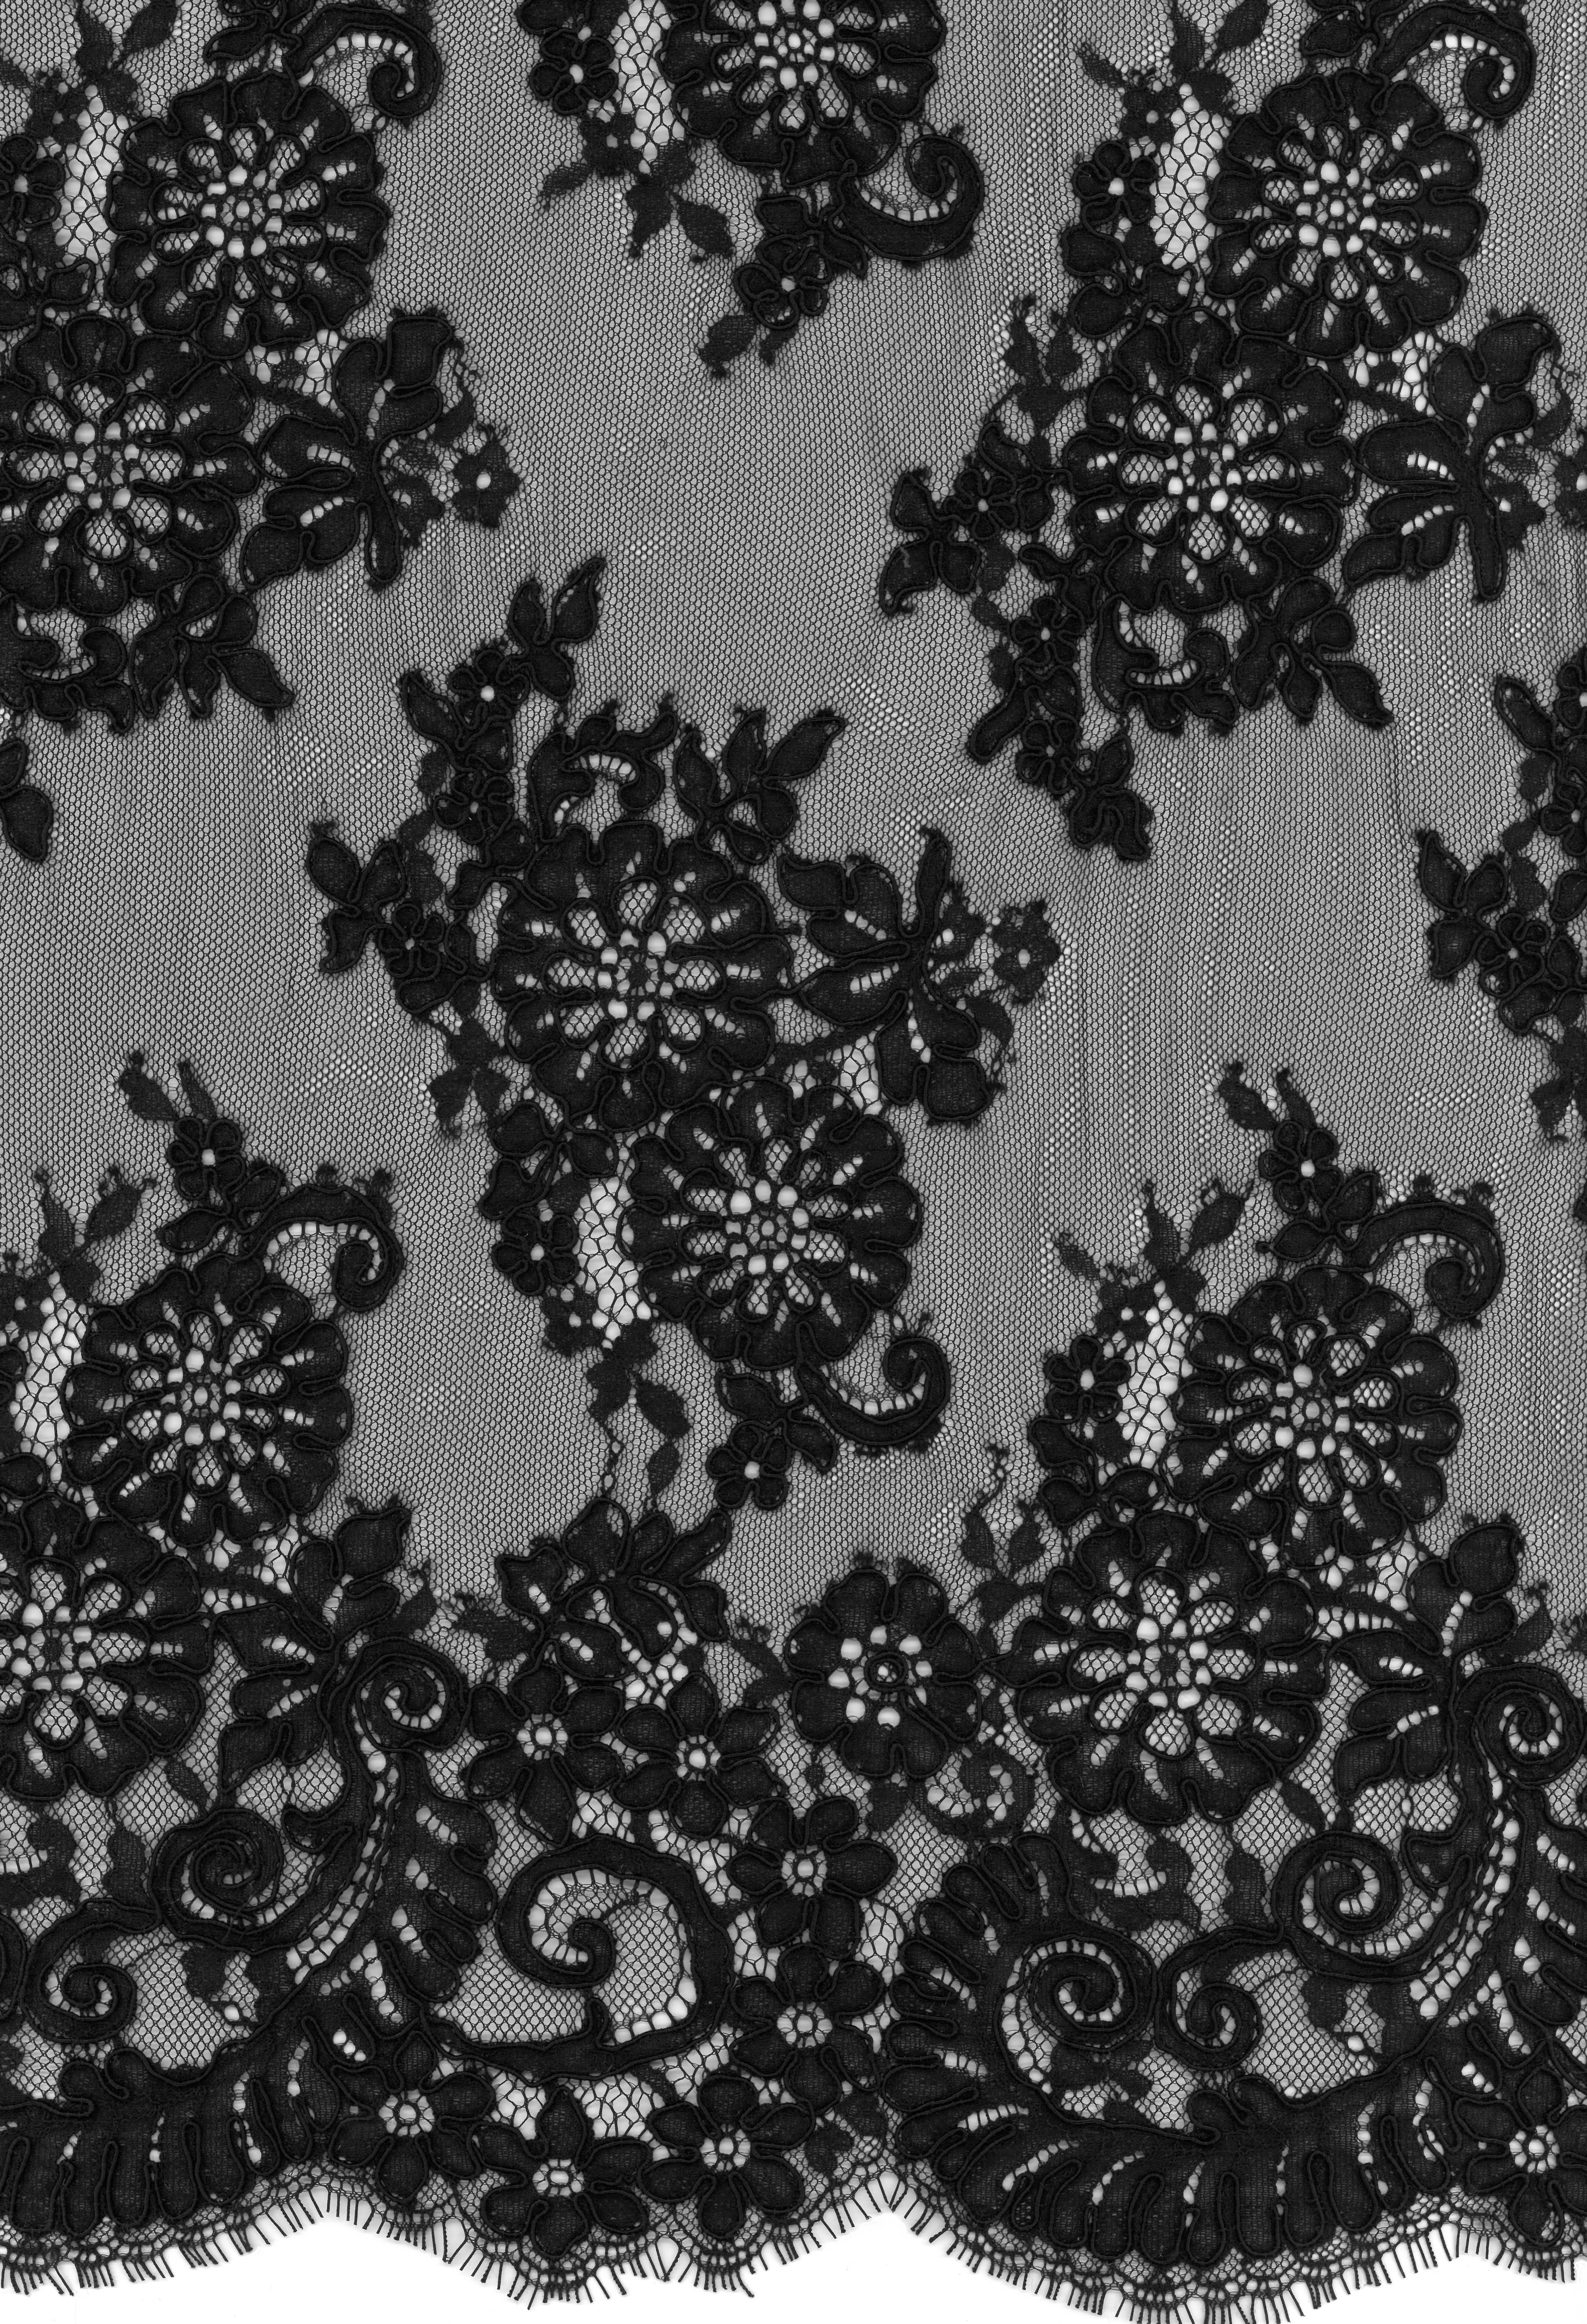 CORDED LACE - BLACK